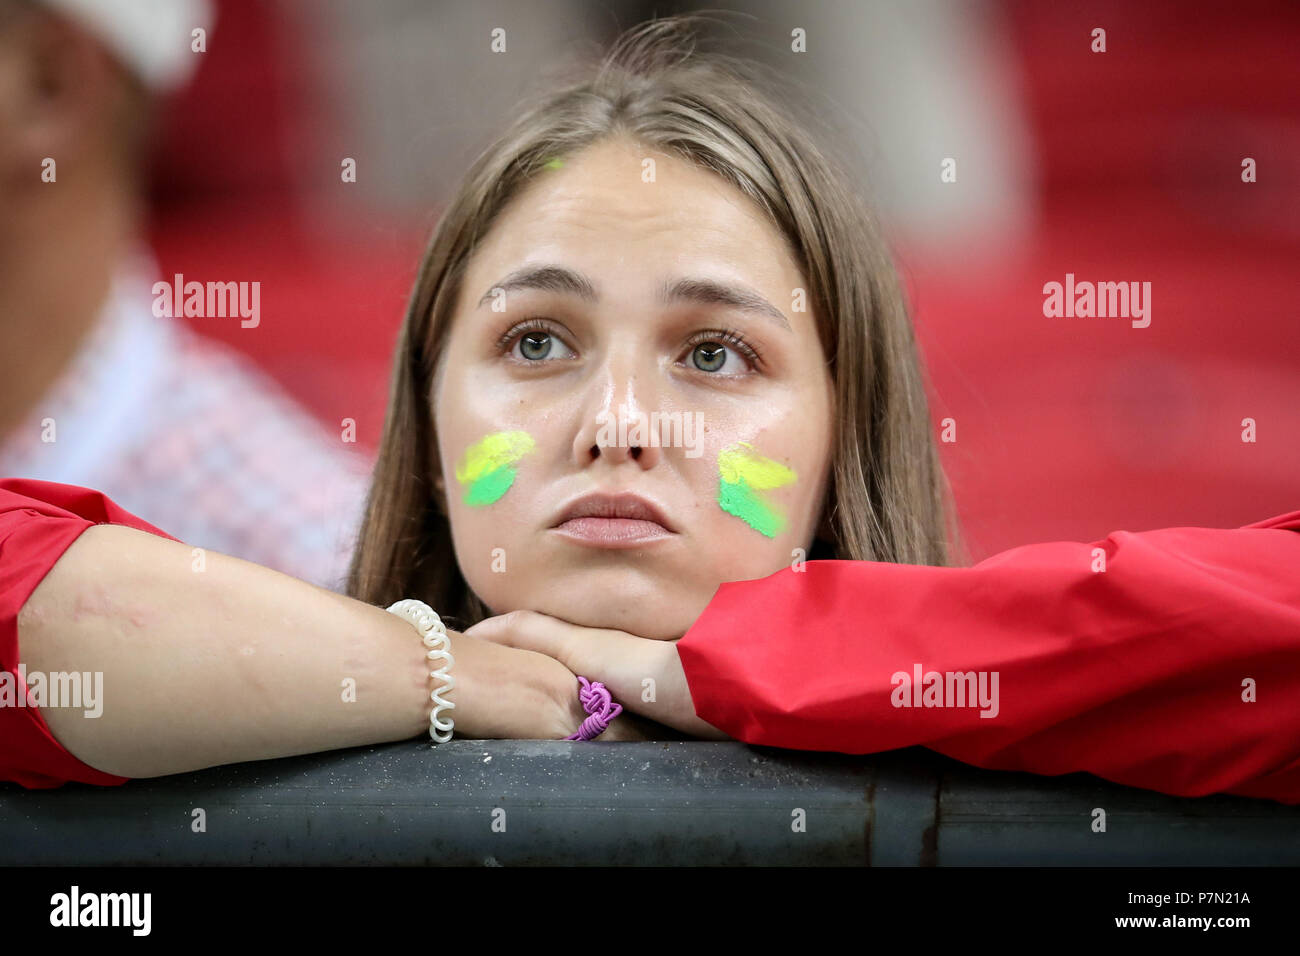 Kazan, Russia. 06th July, 2018. Fan during the match between Brazil and Belgium valid for the quarterfinals of the 2018 World Cup finals, held in Arena Kazan, Russia. Belgium wins 2-1. Credit: Thiago Bernardes/Pacific Press/Alamy Live News Stock Photo